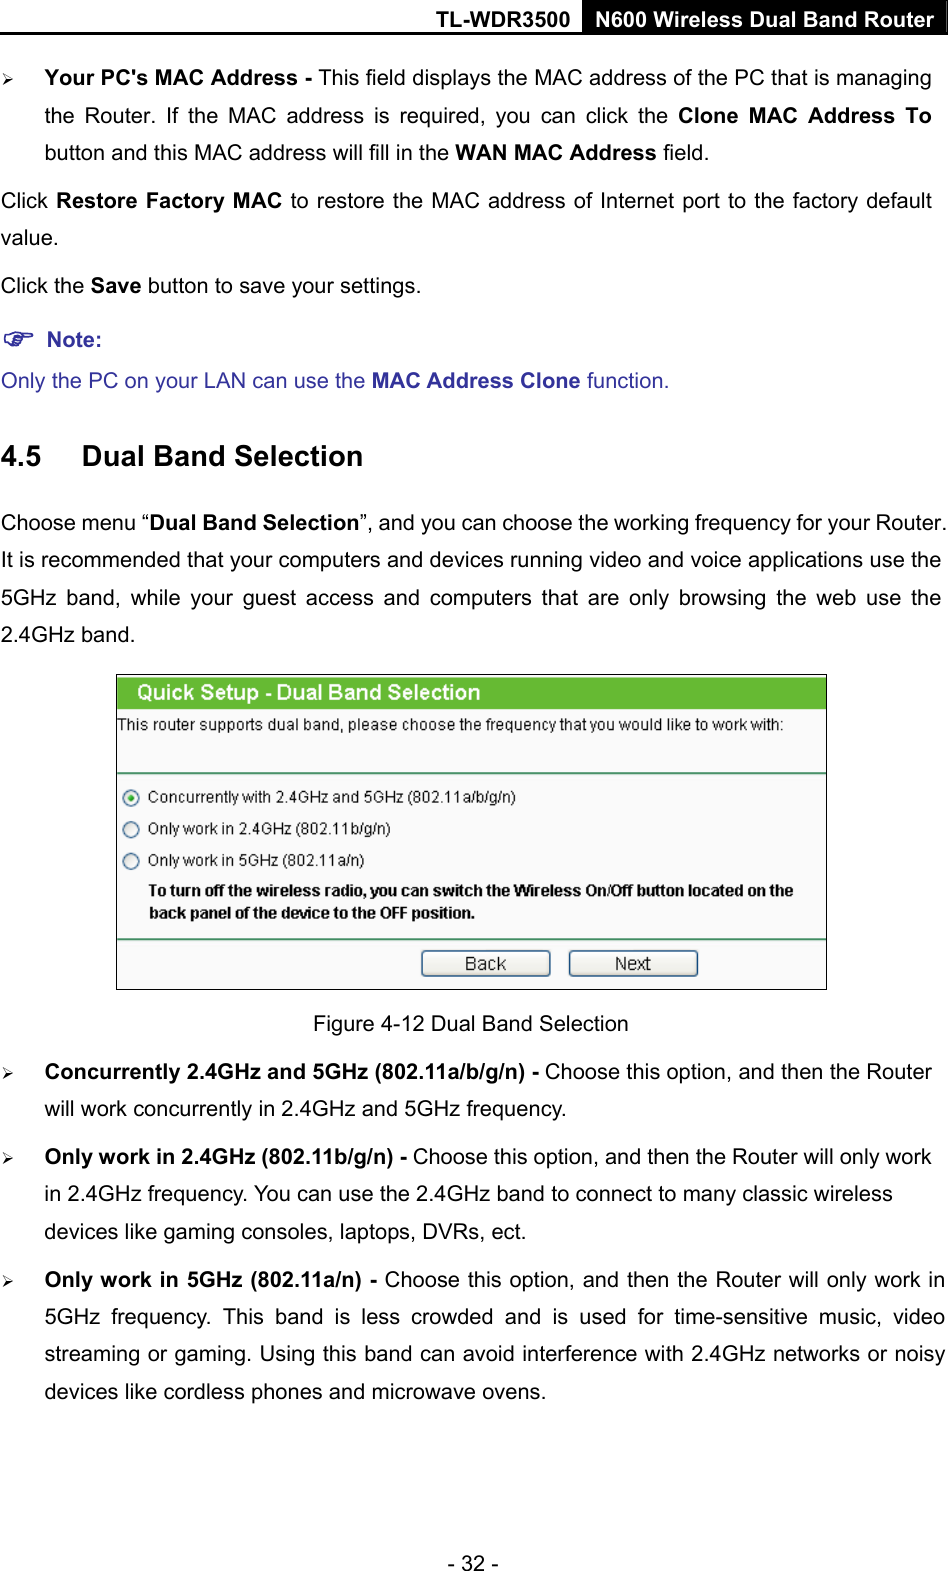 TL-WDR3500 N600 Wireless Dual Band Router - 32 -  Your PC&apos;s MAC Address - This field displays the MAC address of the PC that is managing the Router. If the MAC address is required, you can click the Clone MAC Address To button and this MAC address will fill in the WAN MAC Address field. Click Restore Factory MAC to restore the MAC address of Internet port to the factory default value. Click the Save button to save your settings.  Note:  Only the PC on your LAN can use the MAC Address Clone function. 4.5  Dual Band Selection Choose menu “Dual Band Selection”, and you can choose the working frequency for your Router. It is recommended that your computers and devices running video and voice applications use the 5GHz band, while your guest access and computers that are only browsing the web use the 2.4GHz band.  Figure 4-12 Dual Band Selection  Concurrently 2.4GHz and 5GHz (802.11a/b/g/n) - Choose this option, and then the Router will work concurrently in 2.4GHz and 5GHz frequency.  Only work in 2.4GHz (802.11b/g/n) - Choose this option, and then the Router will only work in 2.4GHz frequency. You can use the 2.4GHz band to connect to many classic wireless devices like gaming consoles, laptops, DVRs, ect.  Only work in 5GHz (802.11a/n) - Choose this option, and then the Router will only work in 5GHz frequency. This band is less crowded and is used for time-sensitive music, video streaming or gaming. Using this band can avoid interference with 2.4GHz networks or noisy devices like cordless phones and microwave ovens. 